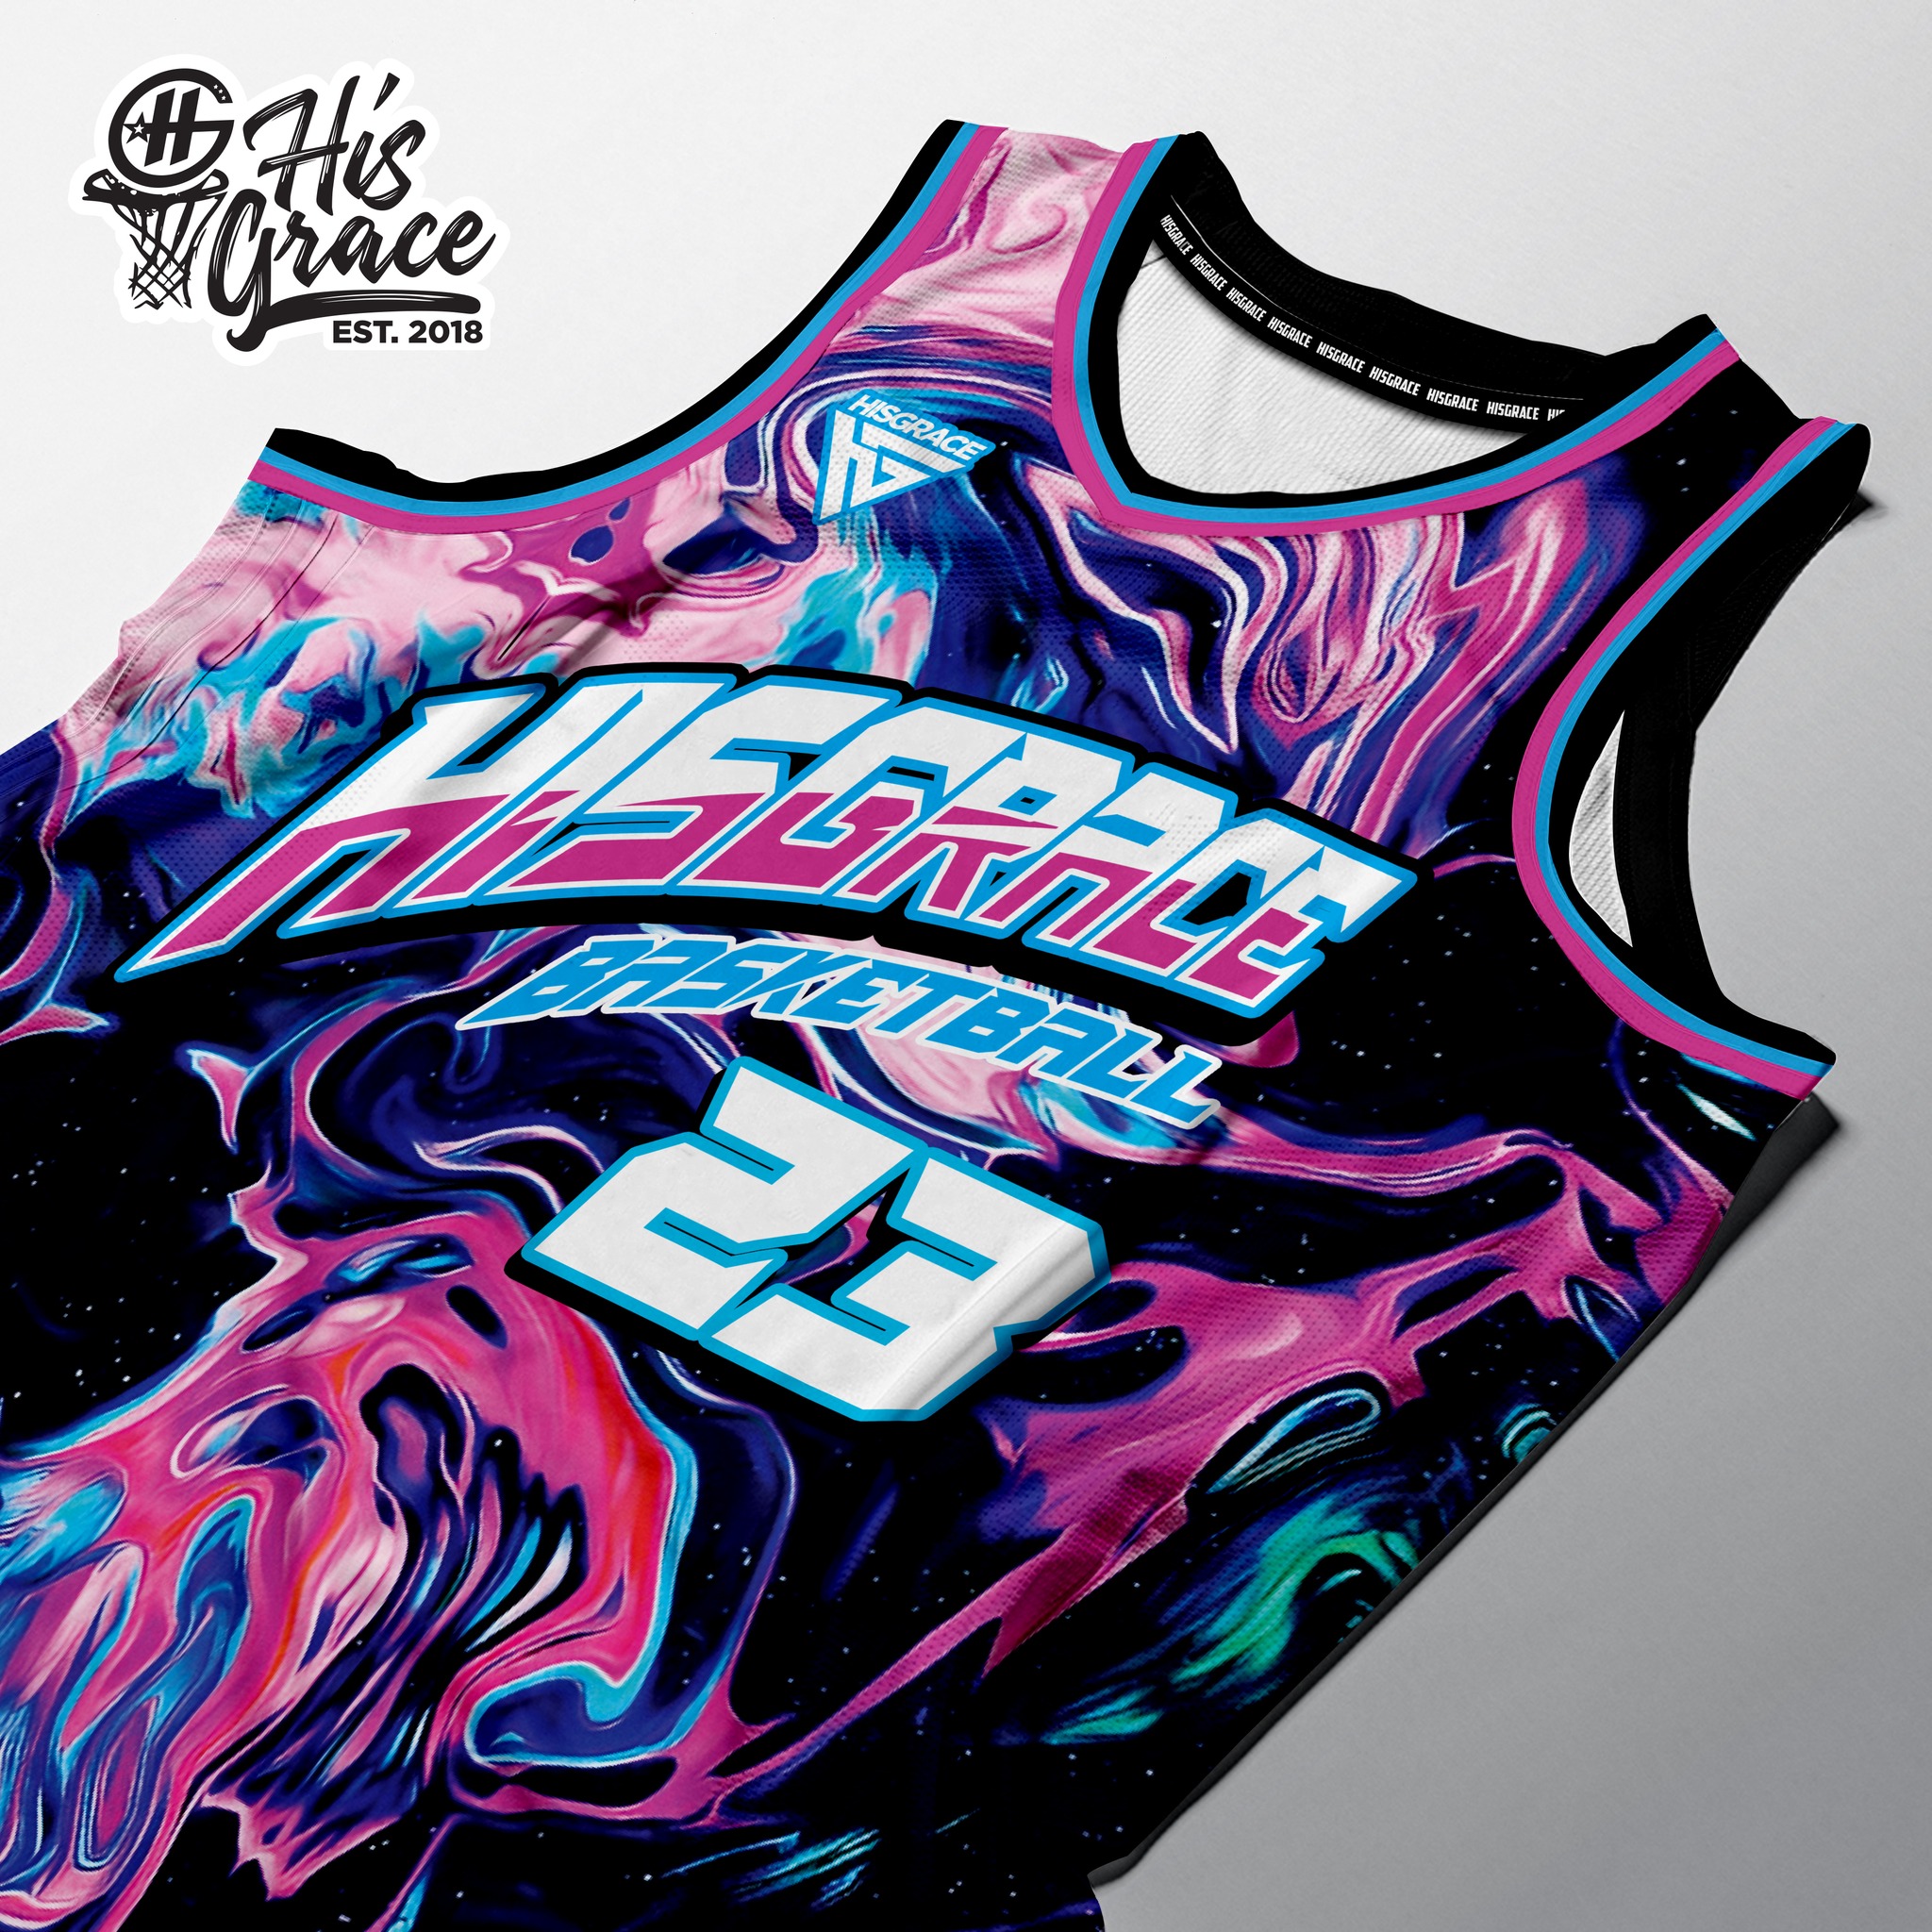 127 HG PINK FIRE BASKETBALL FULL SUBLIMATION JERSEY#sublimize